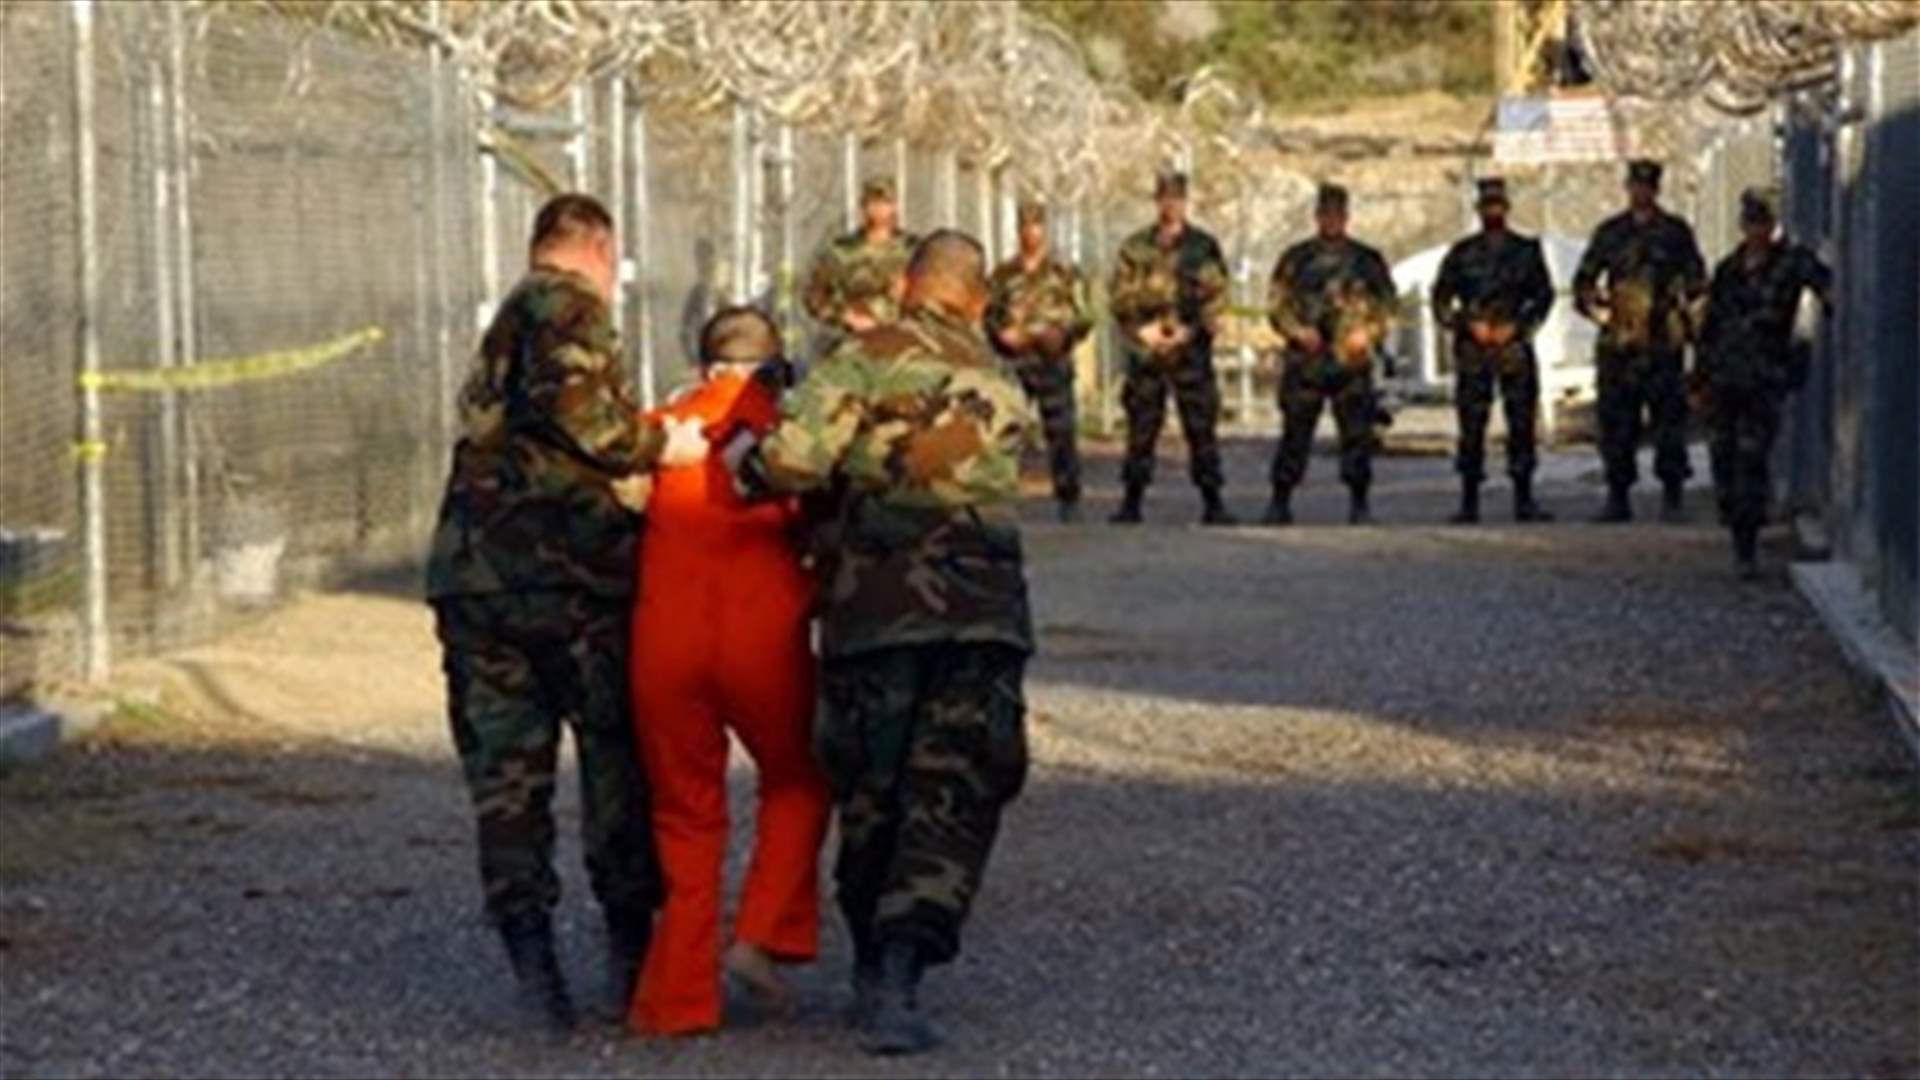 Oman says receives 10 detainees released from Guantanamo   